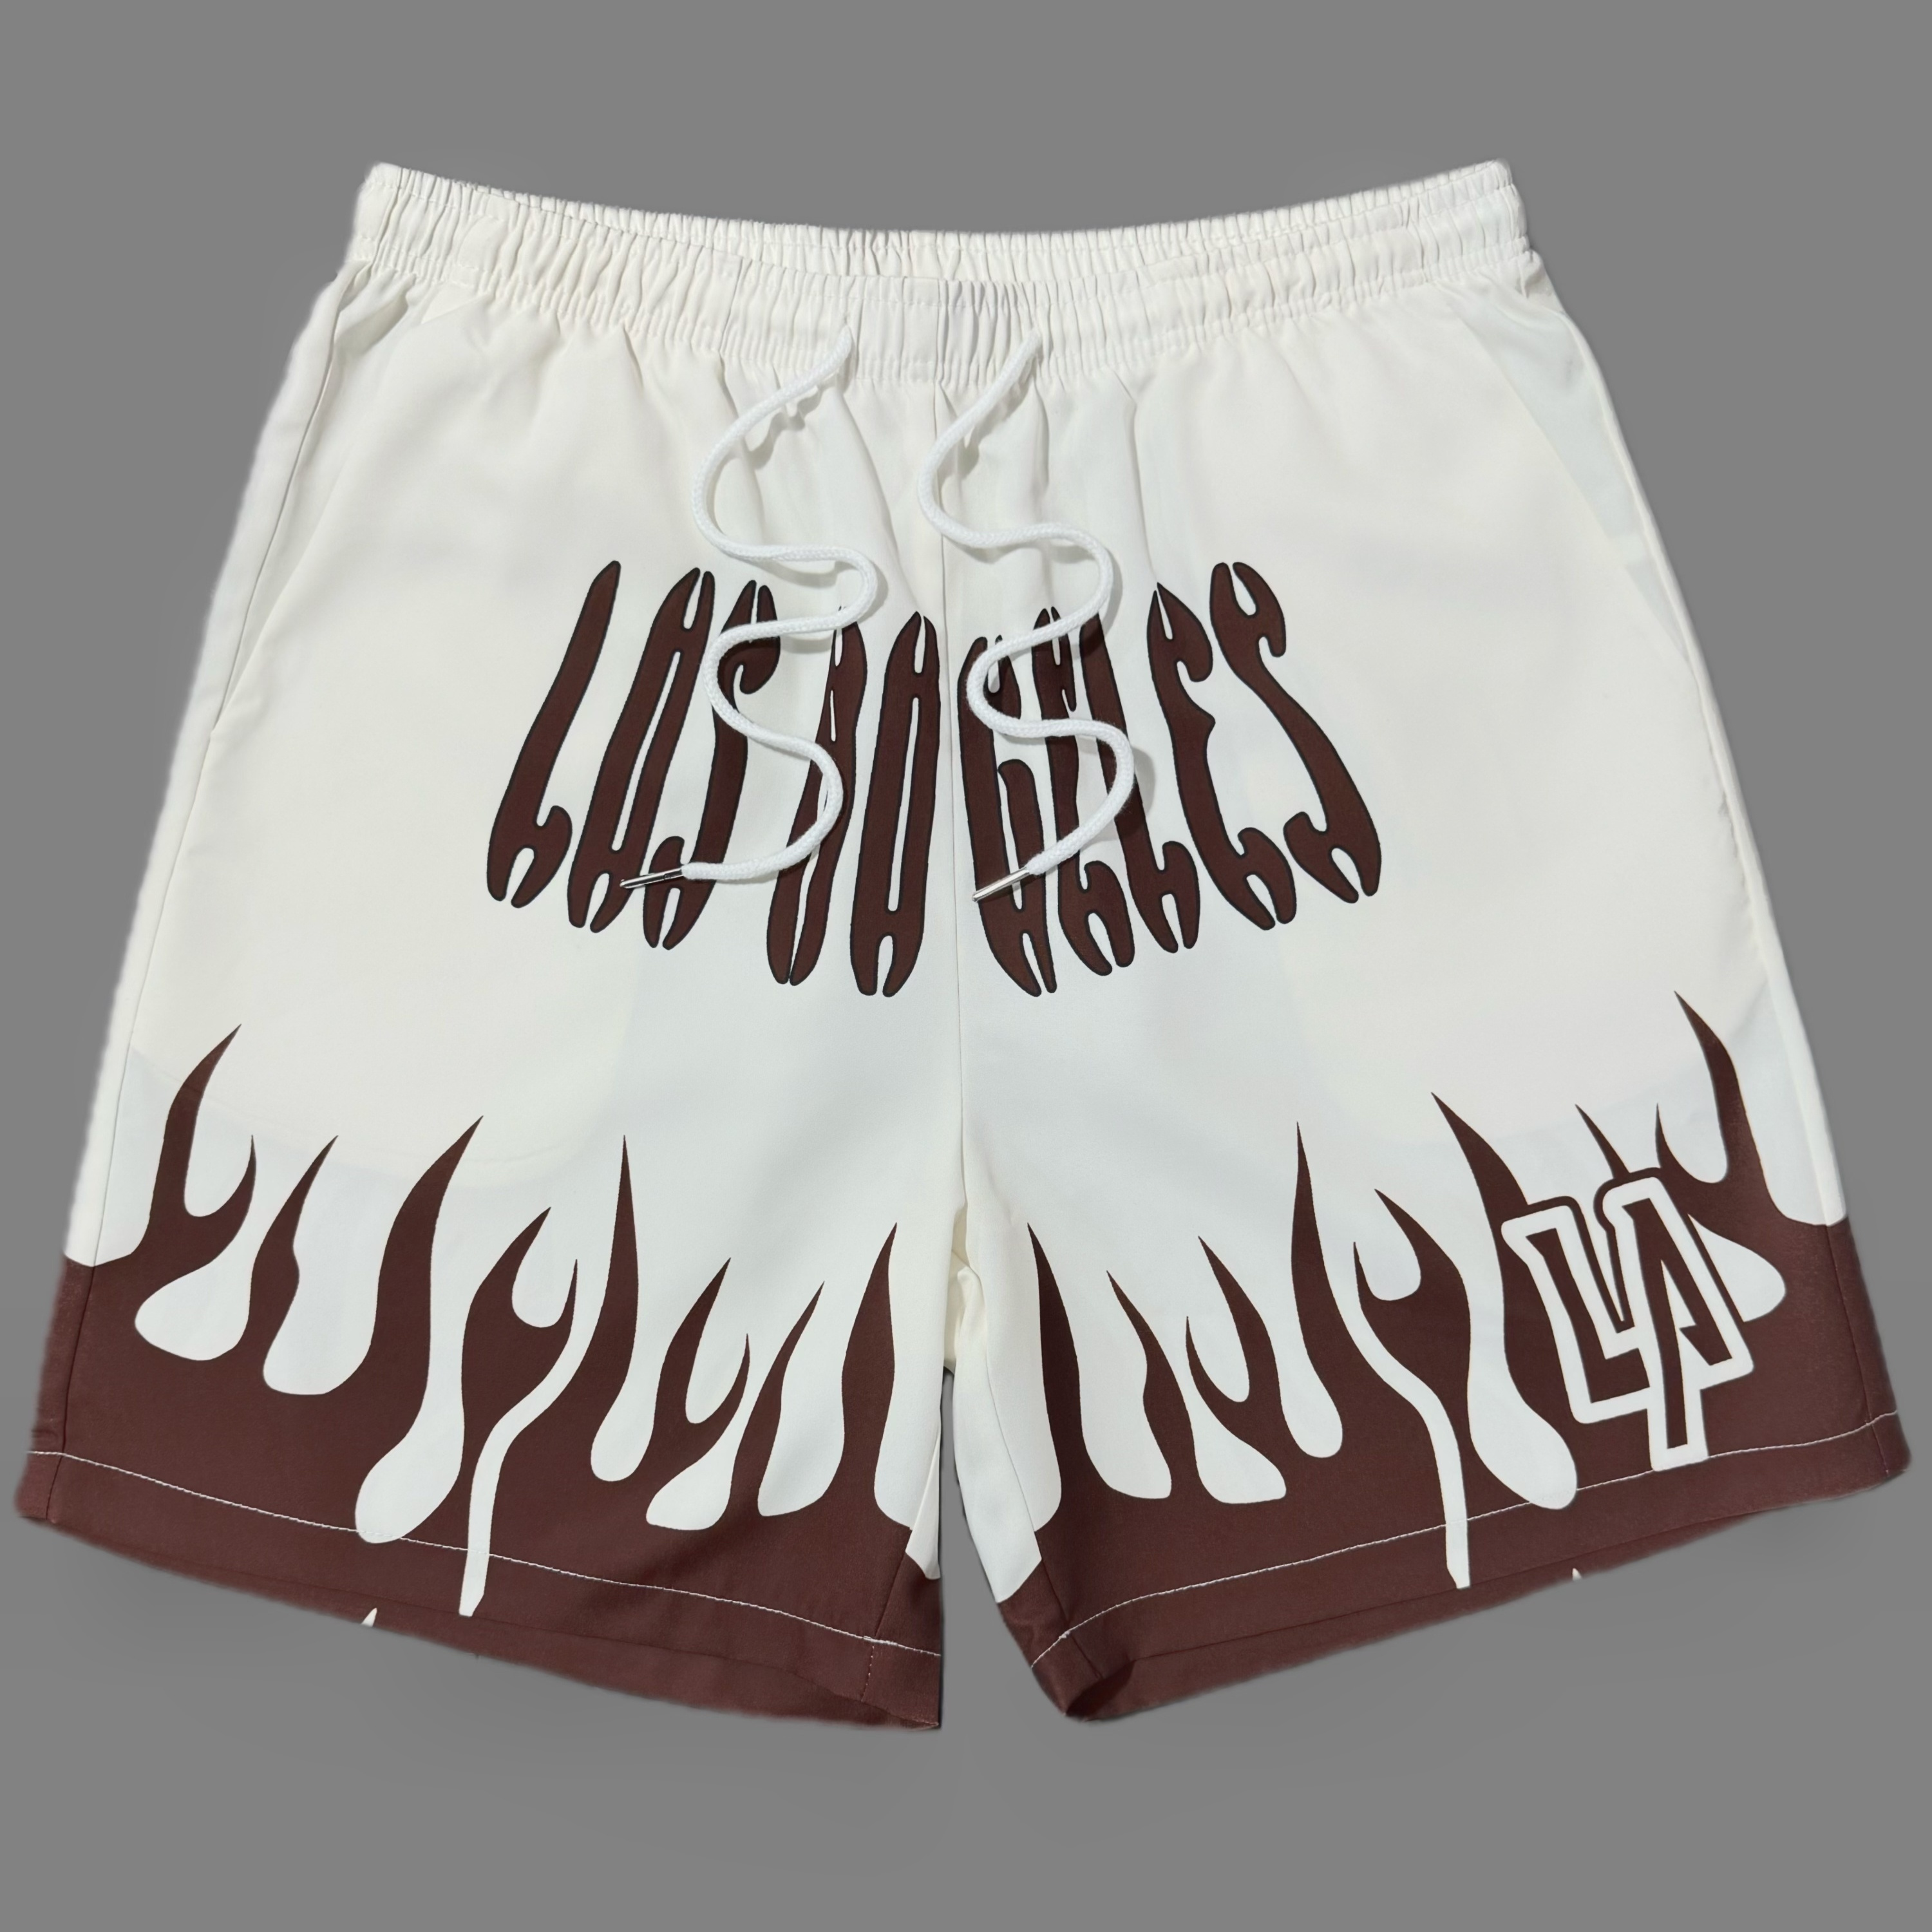 

1pc, Men's Fire Graphic Pattern And Letter Print "los Angeles" Shorts With Drawstring And Pockets, Casual And Trendy Shorts For Summer Street And Sports Wear